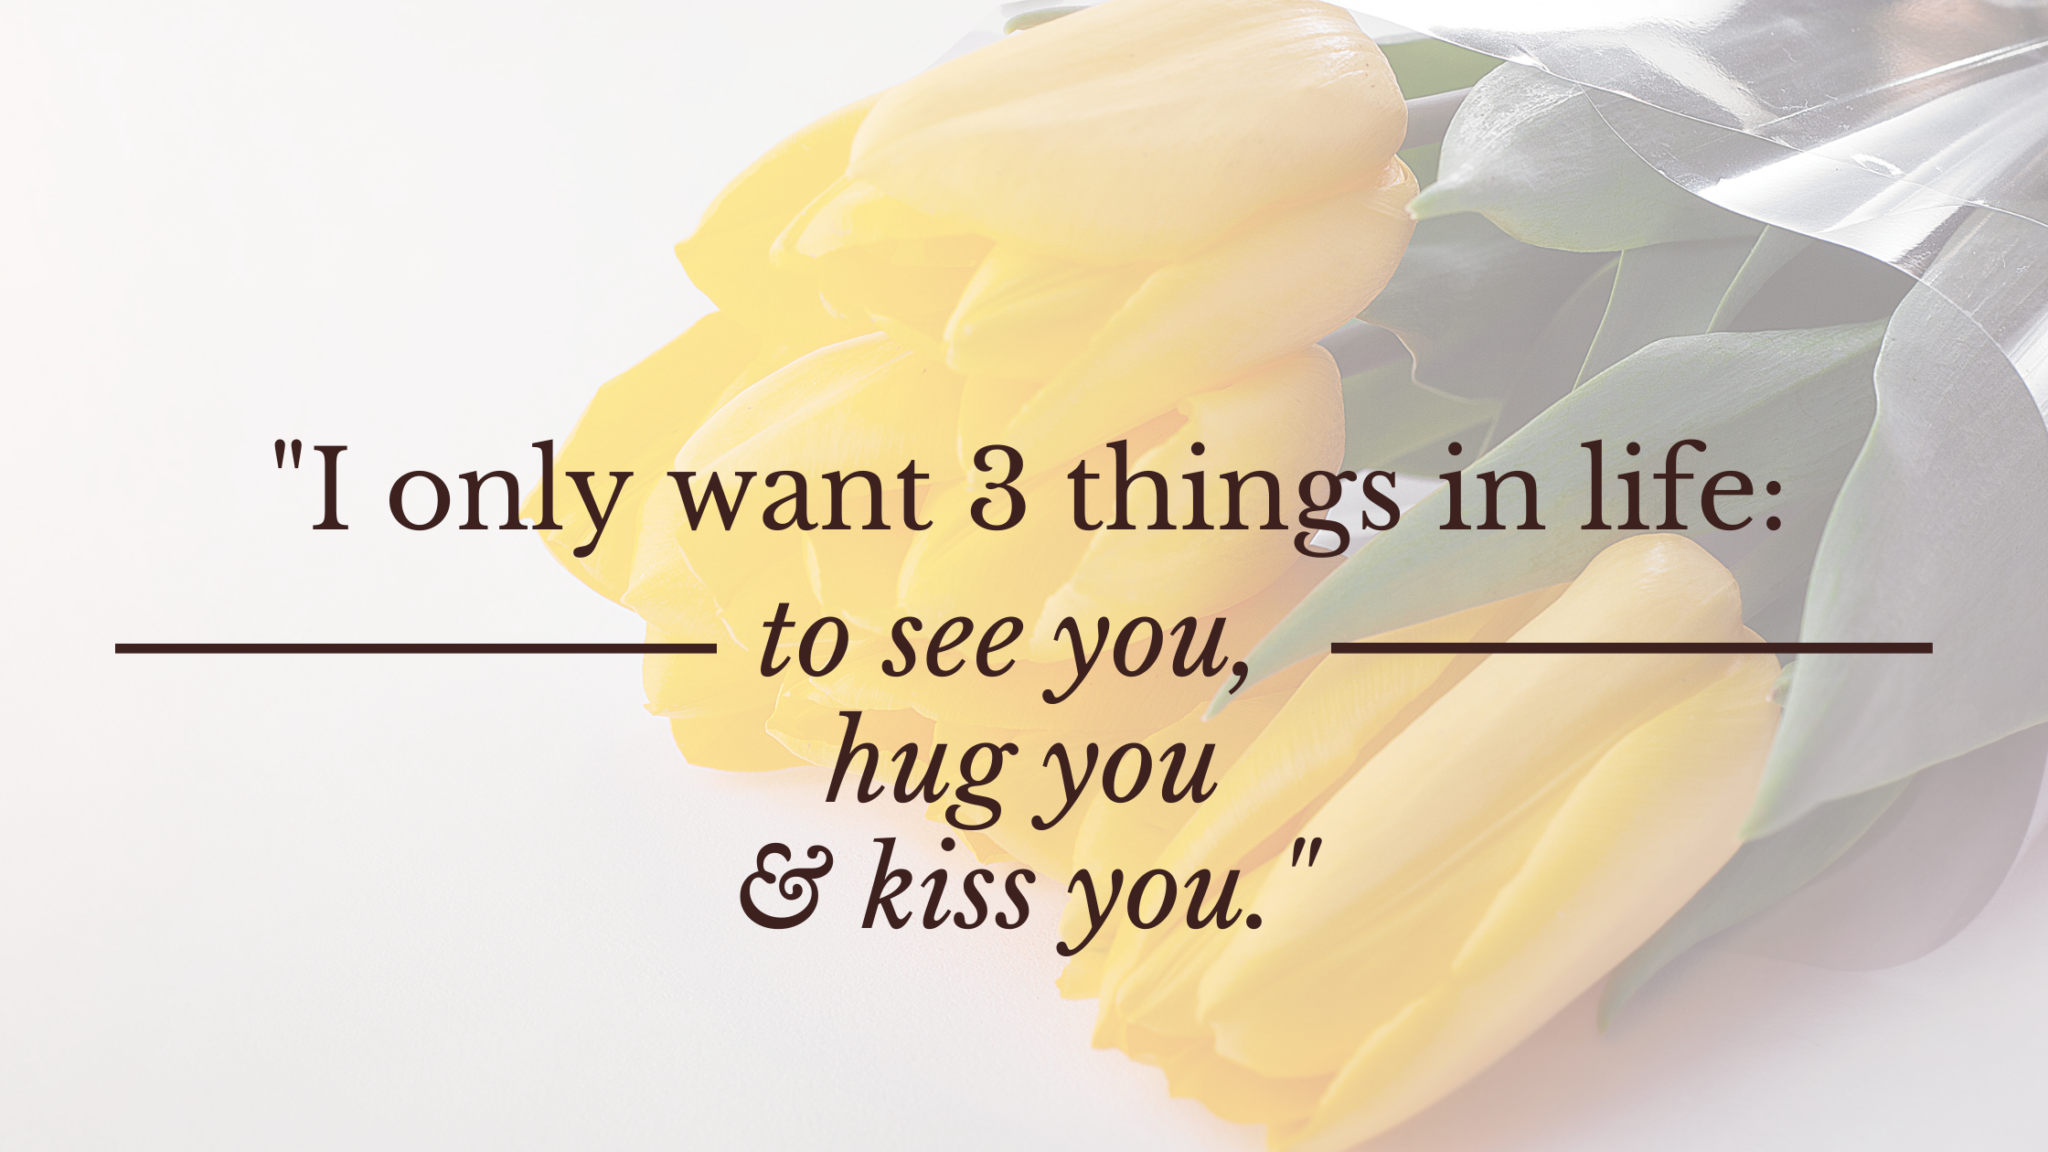 35 Cheesy Love Quotes For Being Mushy | Bridal Shower 101